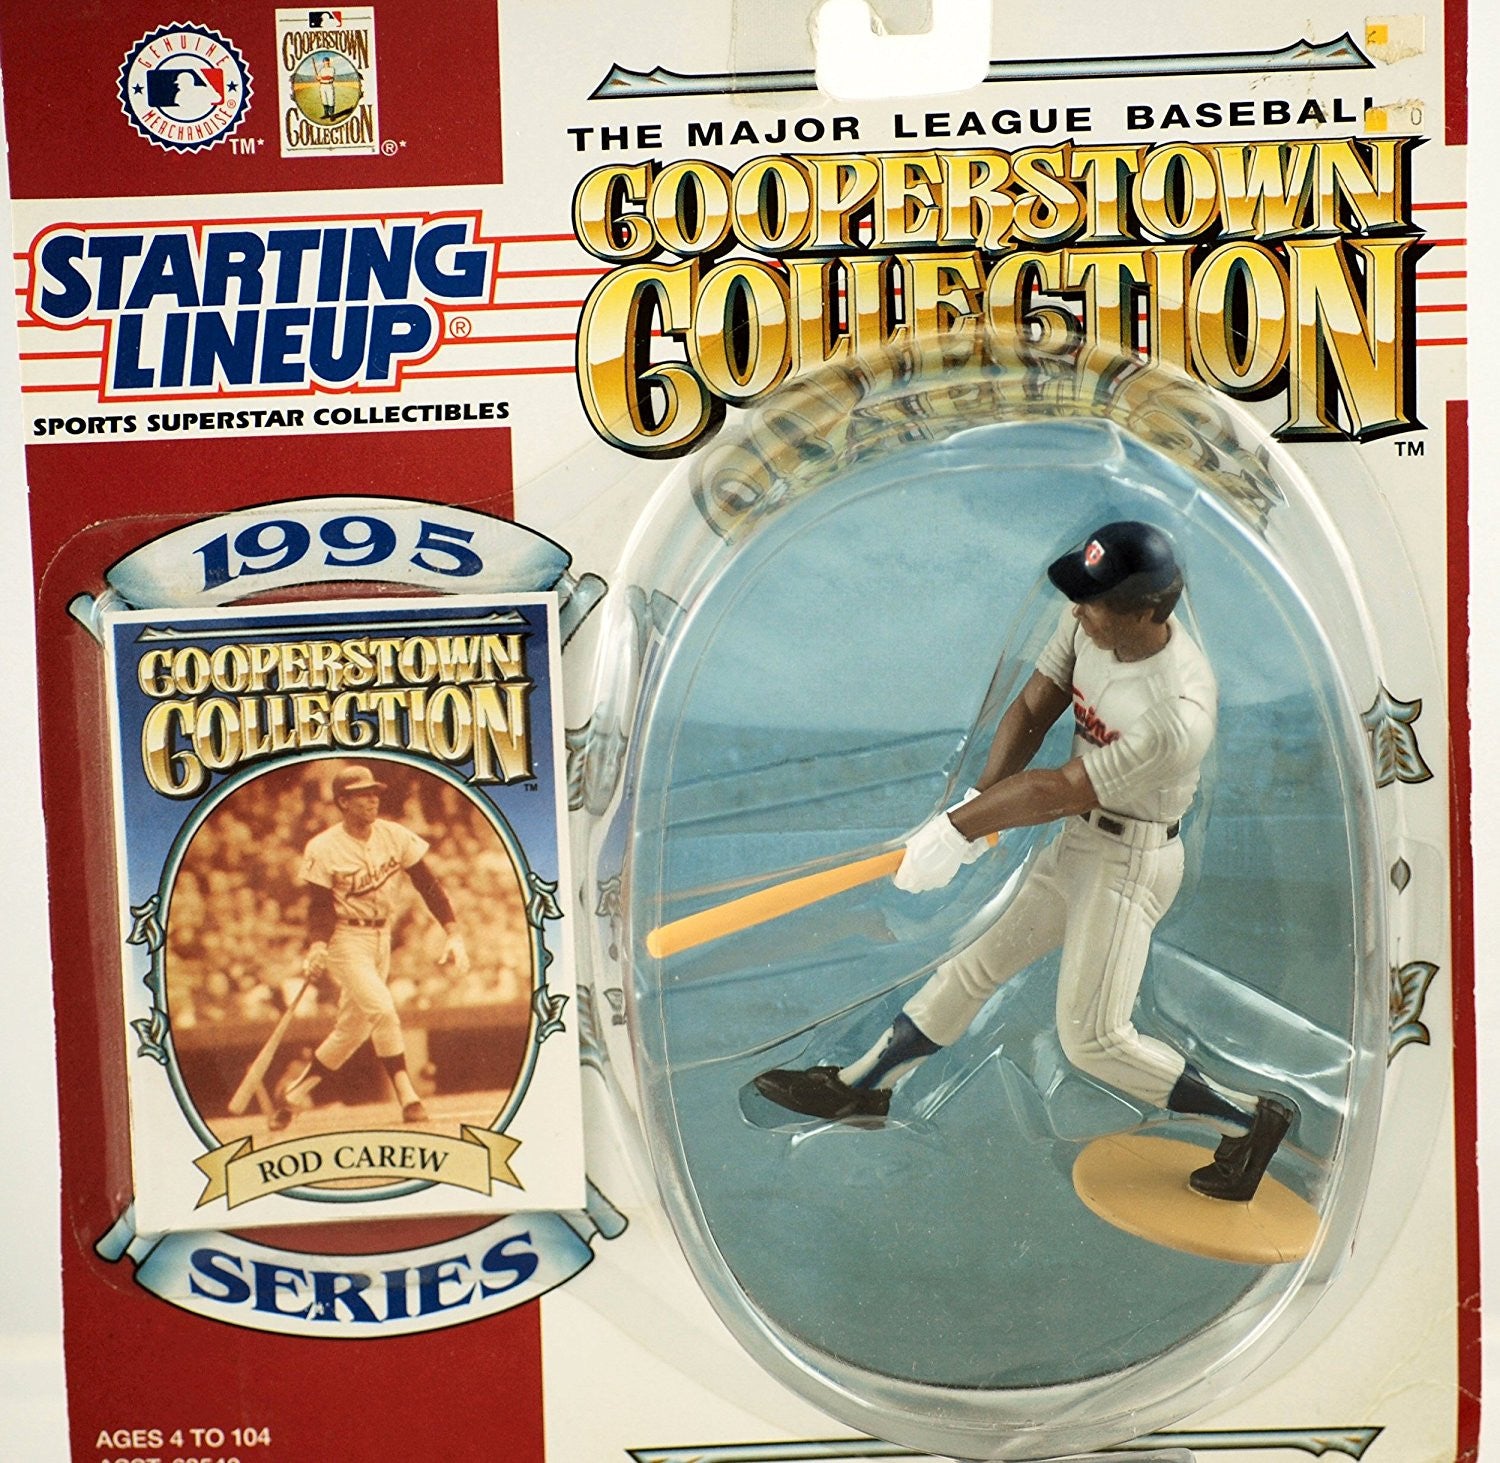 1995 Starting Lineup Cooperstown Collection - Rod Carew #29 - Minnesota Twins - Vintage Action Figure - w/ Trading Card - Limited Edition - Collectible